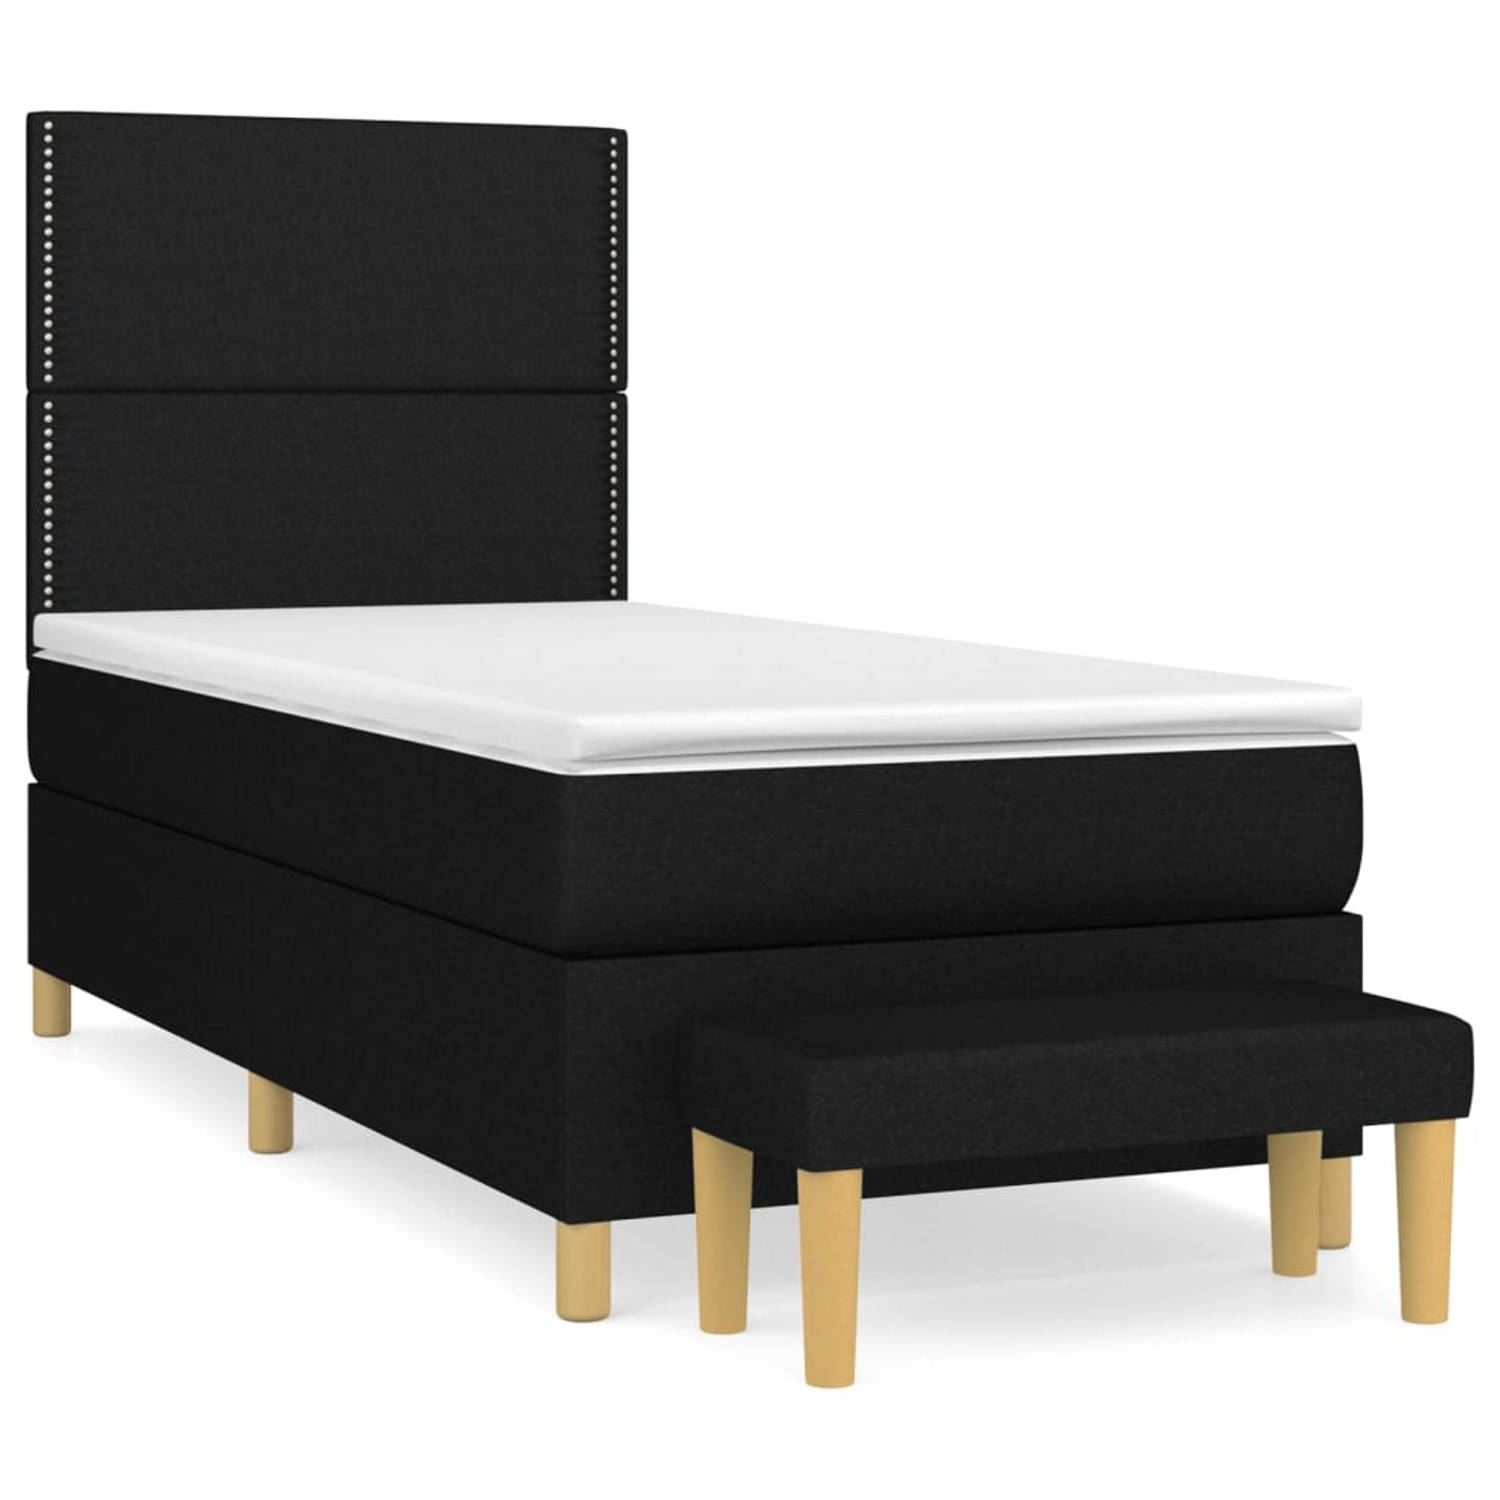 The Living Store Boxspringbed - Comfort - Bed - 203 x 100 x 118/128 cm - Zwart